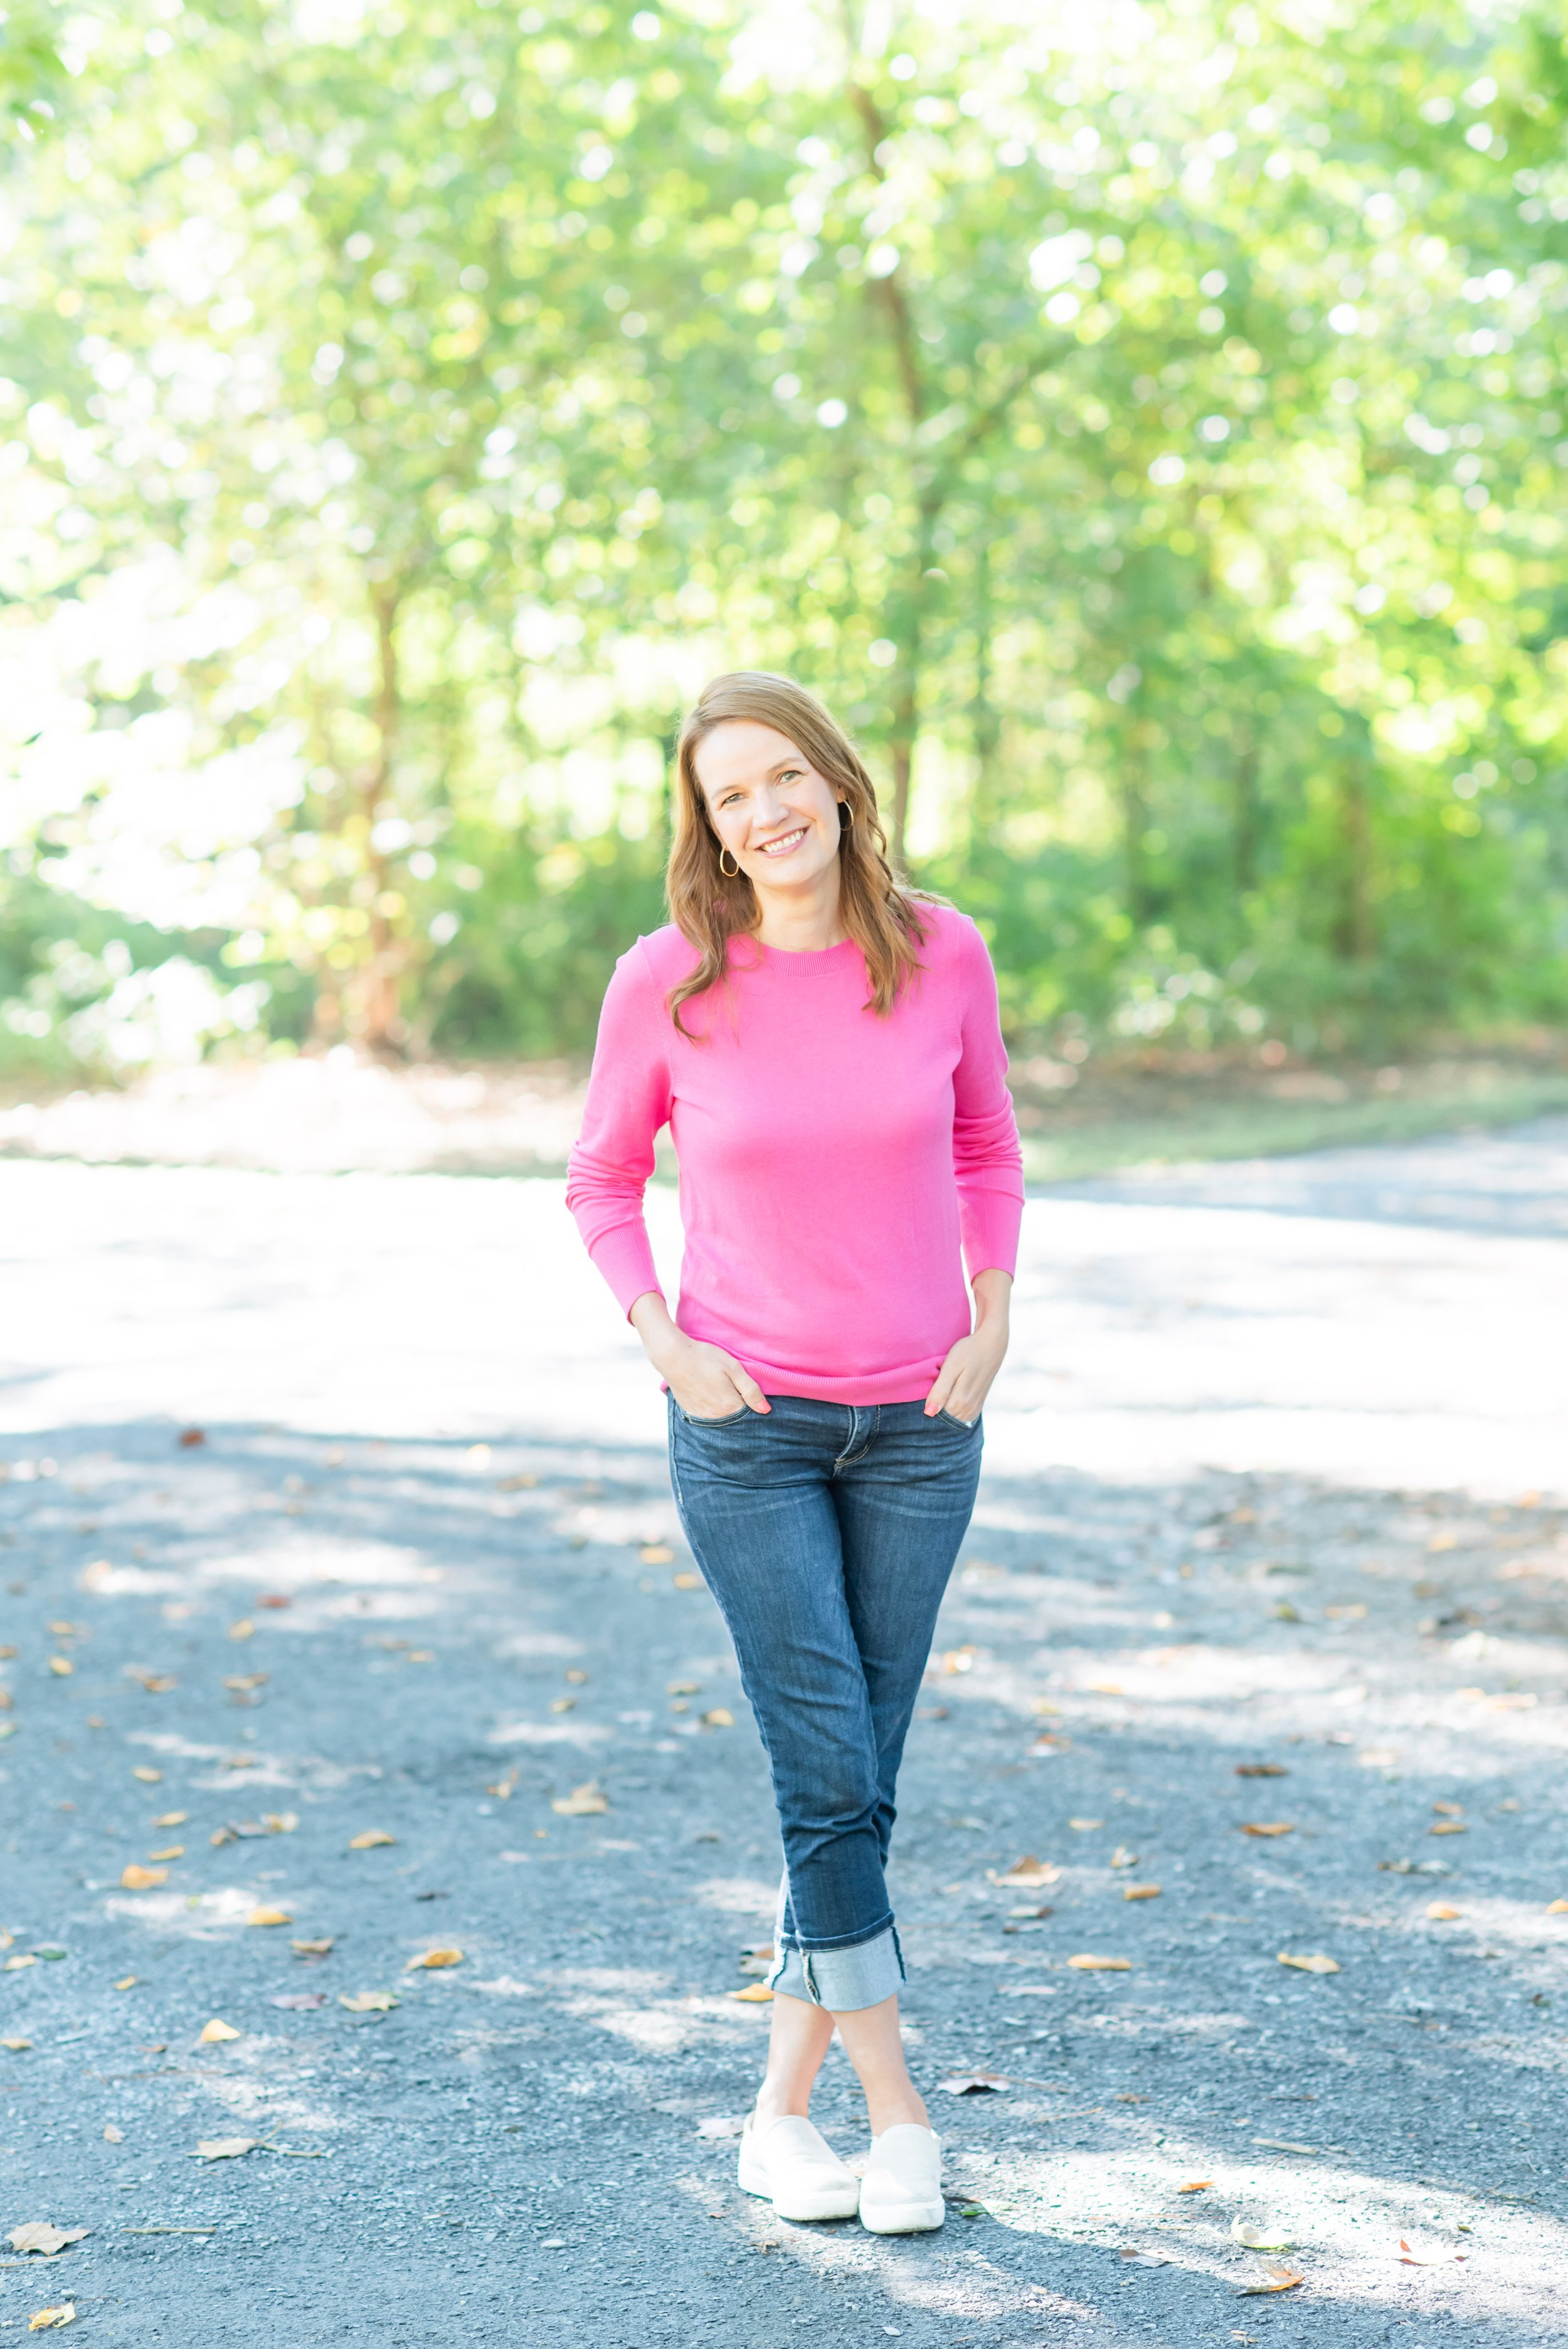 photographer walking with her hands in pockets wearing a pink sweater